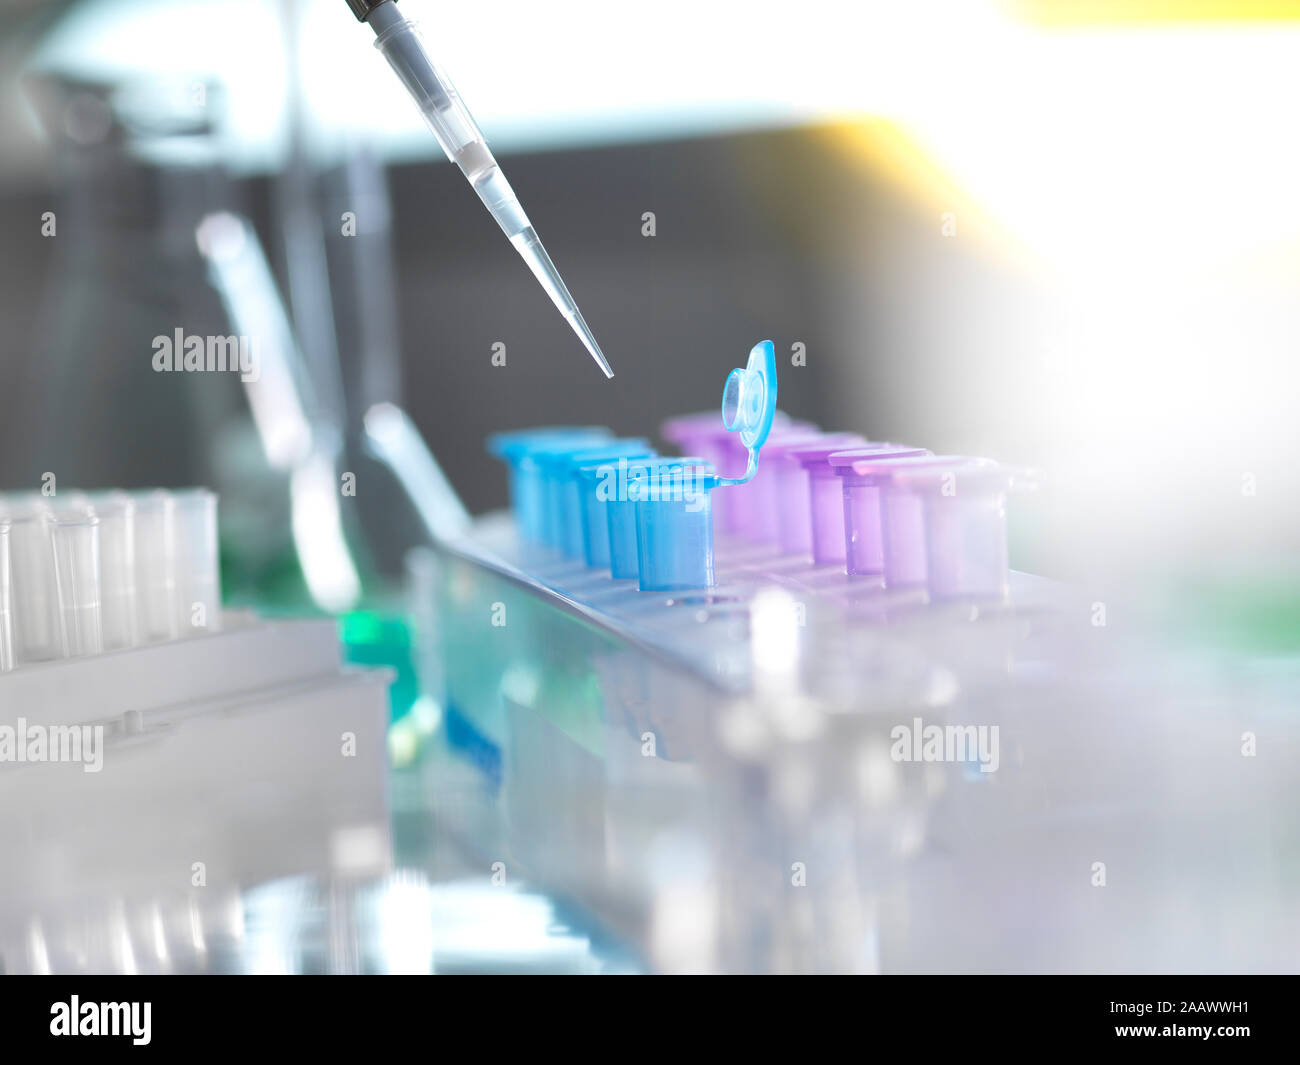 Samples being poured in test tube for research at laboratory Stock Photo